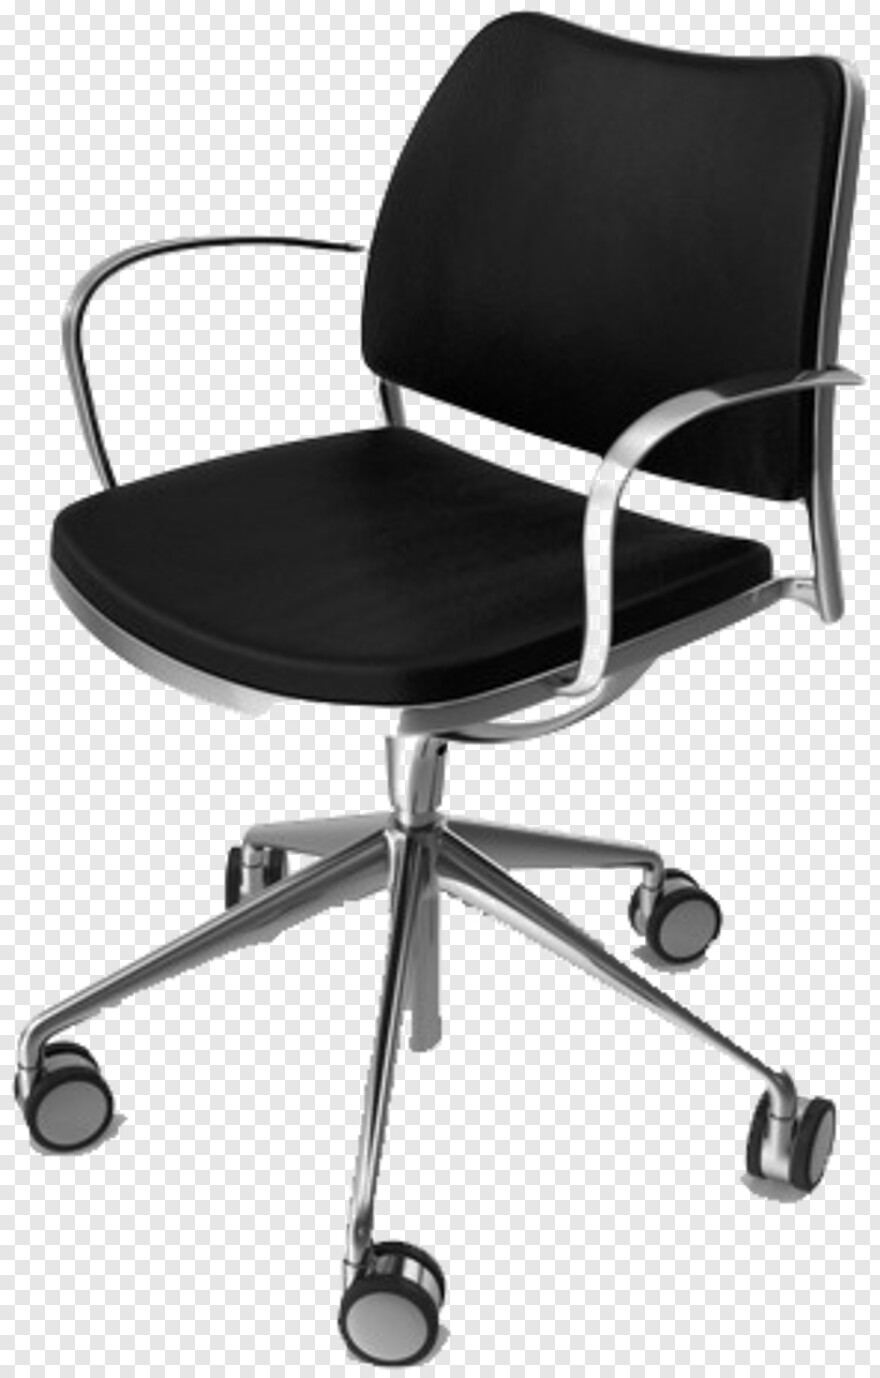 office-chair # 450744